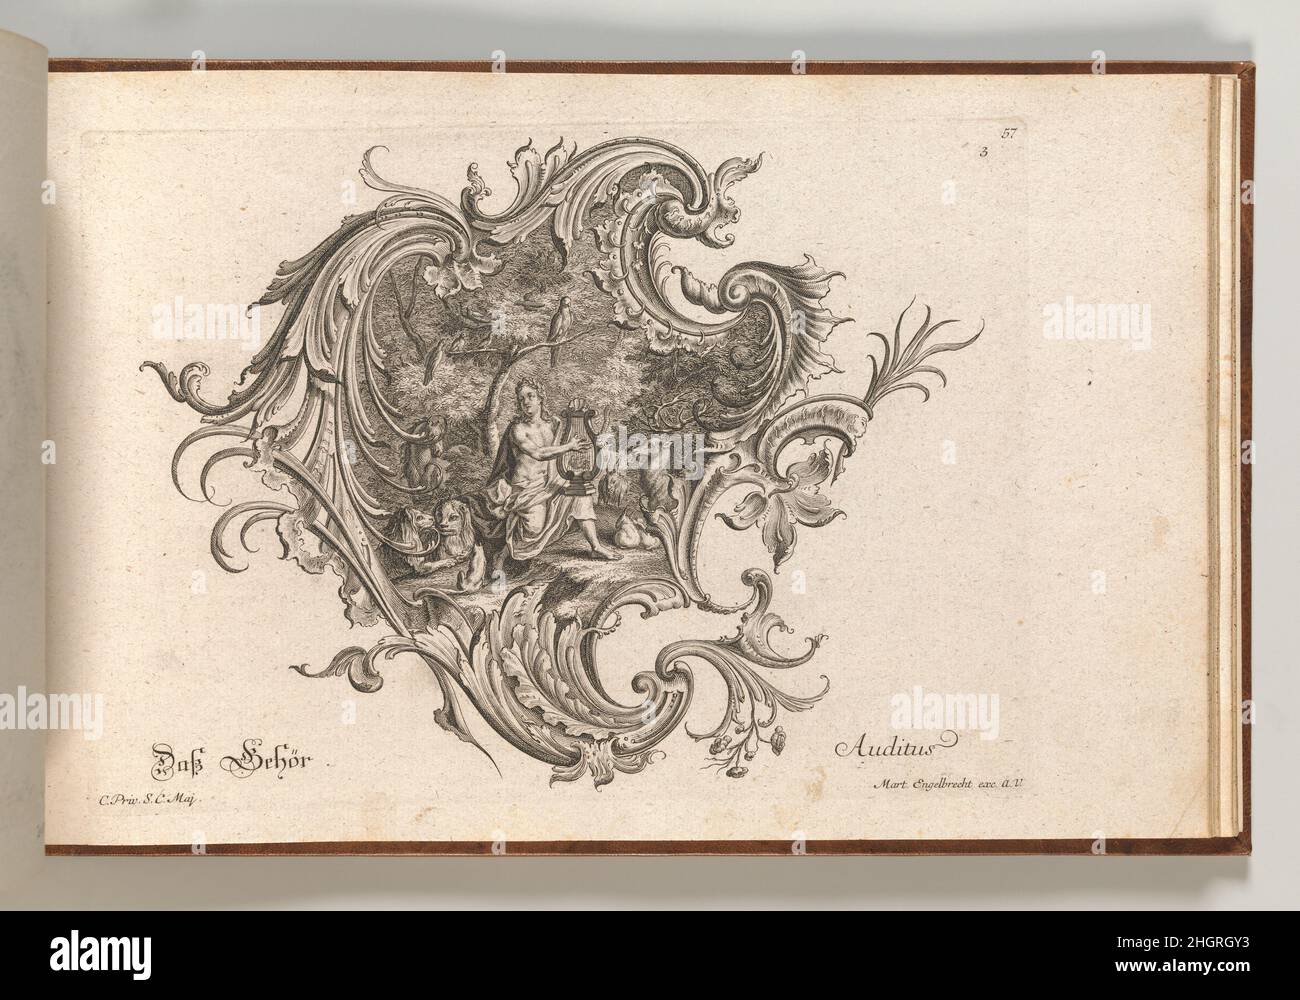 Design for a Cartouche and Representation of 'Hearing', Plate 3 from 'Neu Inventierte auf die artigste Facon Sehr nutzliche Schild.' Printed ca. 1750–56 Johann Georg Pintz Ornament print with a design for a rocaille cartouche, with a depiction of Orpheus playing for the animals in the central compartment, to illustrate the sense of 'hearing'. This print is bound in an album containing 27 series with a total of 122 ornament prints from the fund of the prominent Augsburg publisher Martin Engelbrecht.. Design for a Cartouche and Representation of 'Hearing', Plate 3 from 'Neu Inventierte auf die a Stock Photo